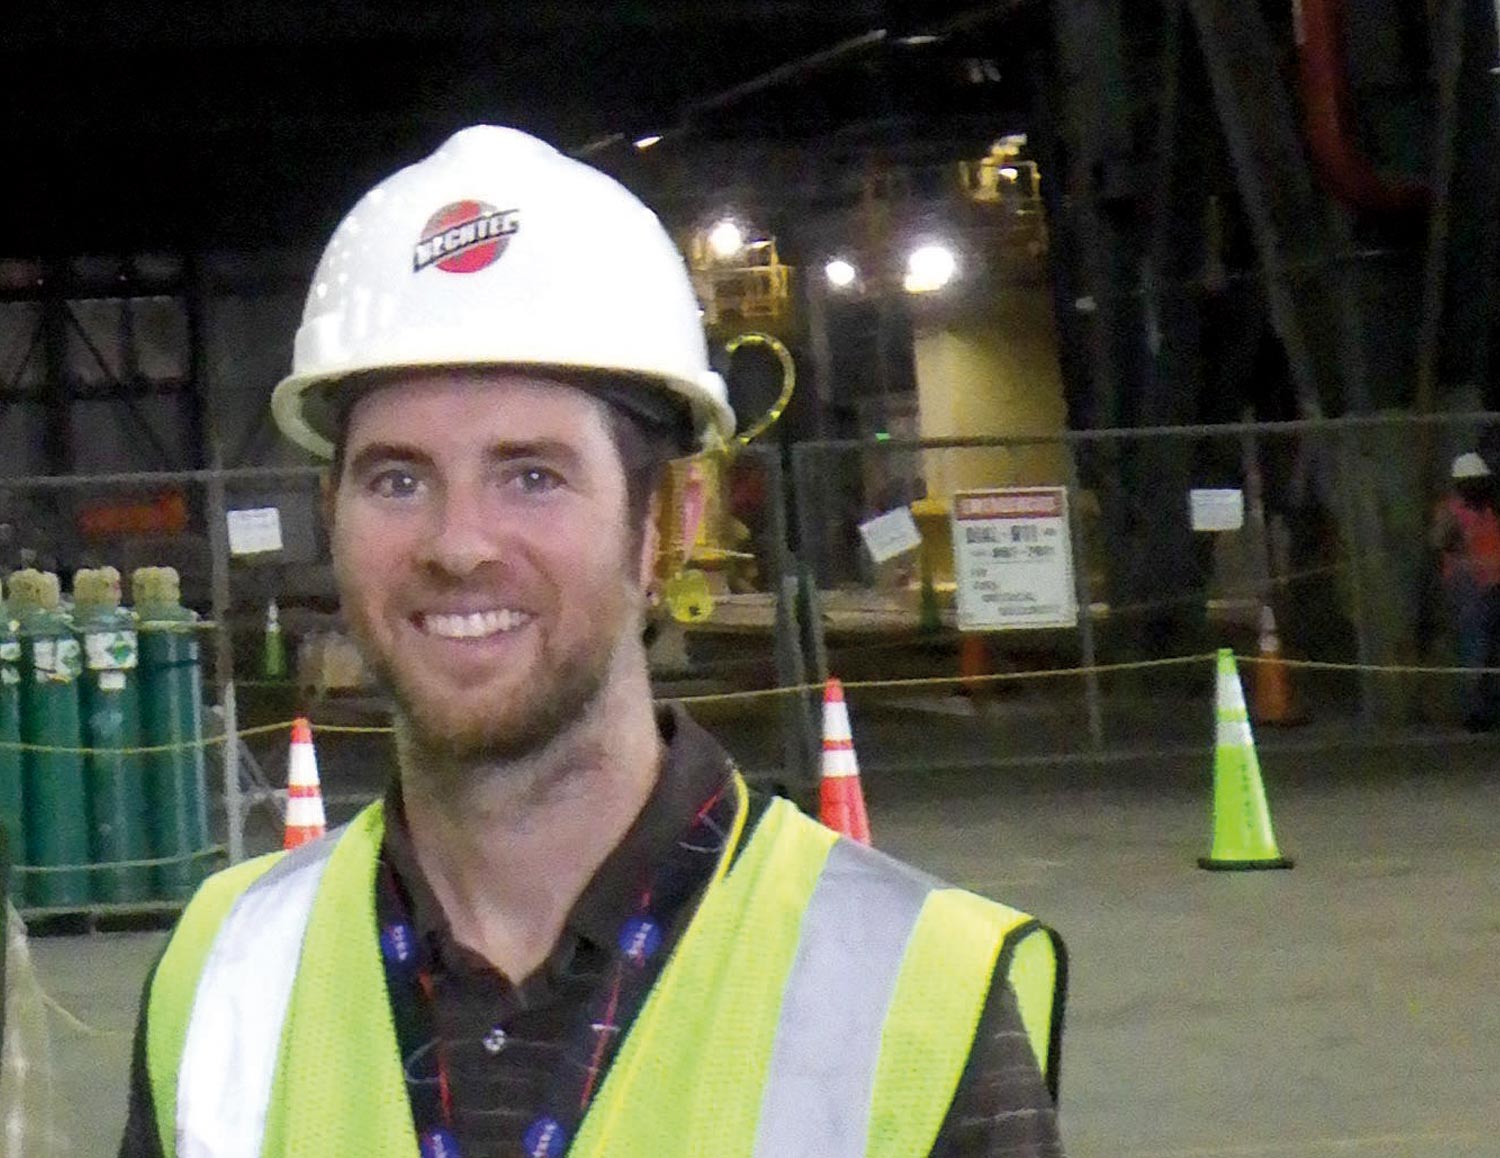 photo of Kevin MacLeod on site, smiling wearing a hard hat and safety vest